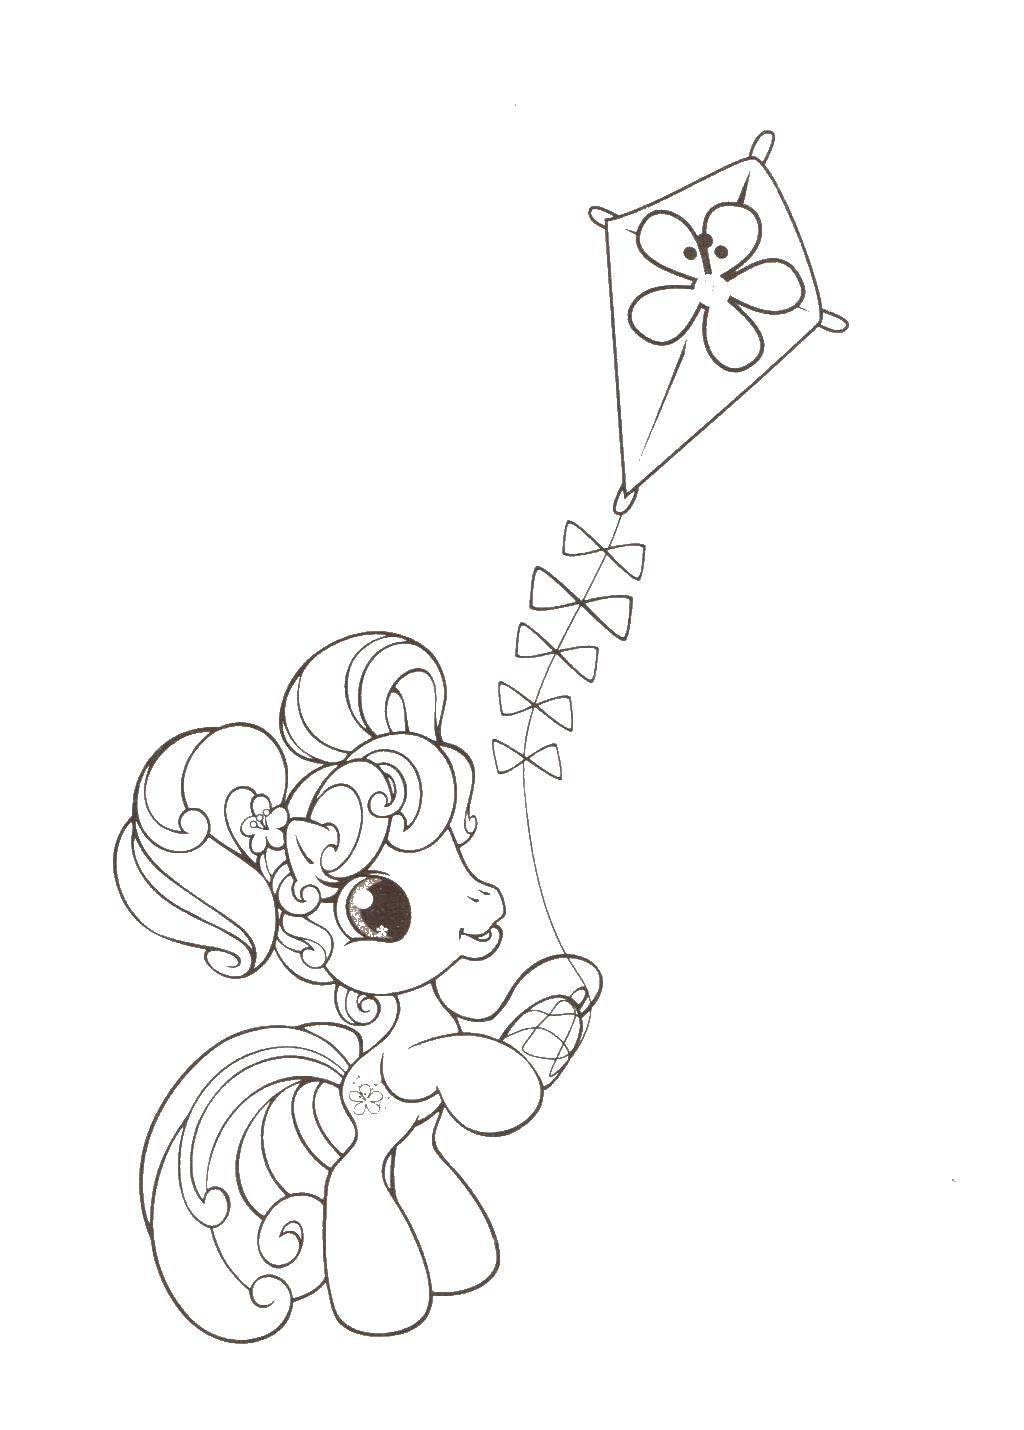 Coloring A pony with a kite. Category Ponies. Tags:  ponies.